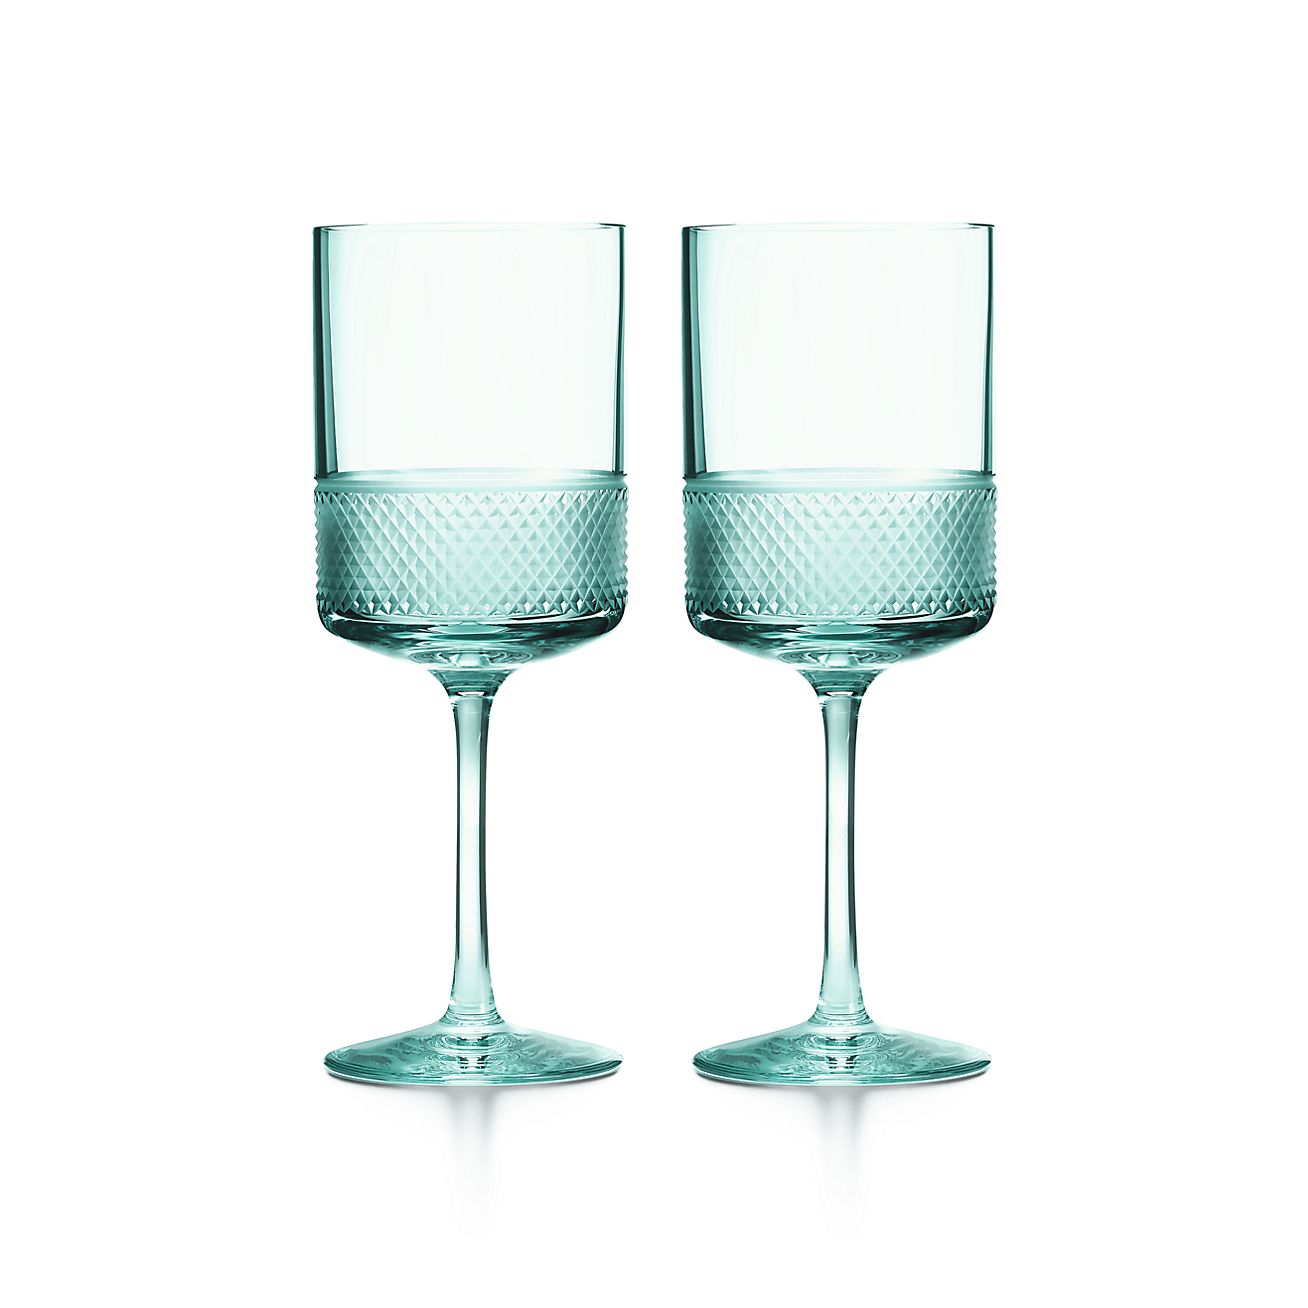 tiffany and co blue glasses